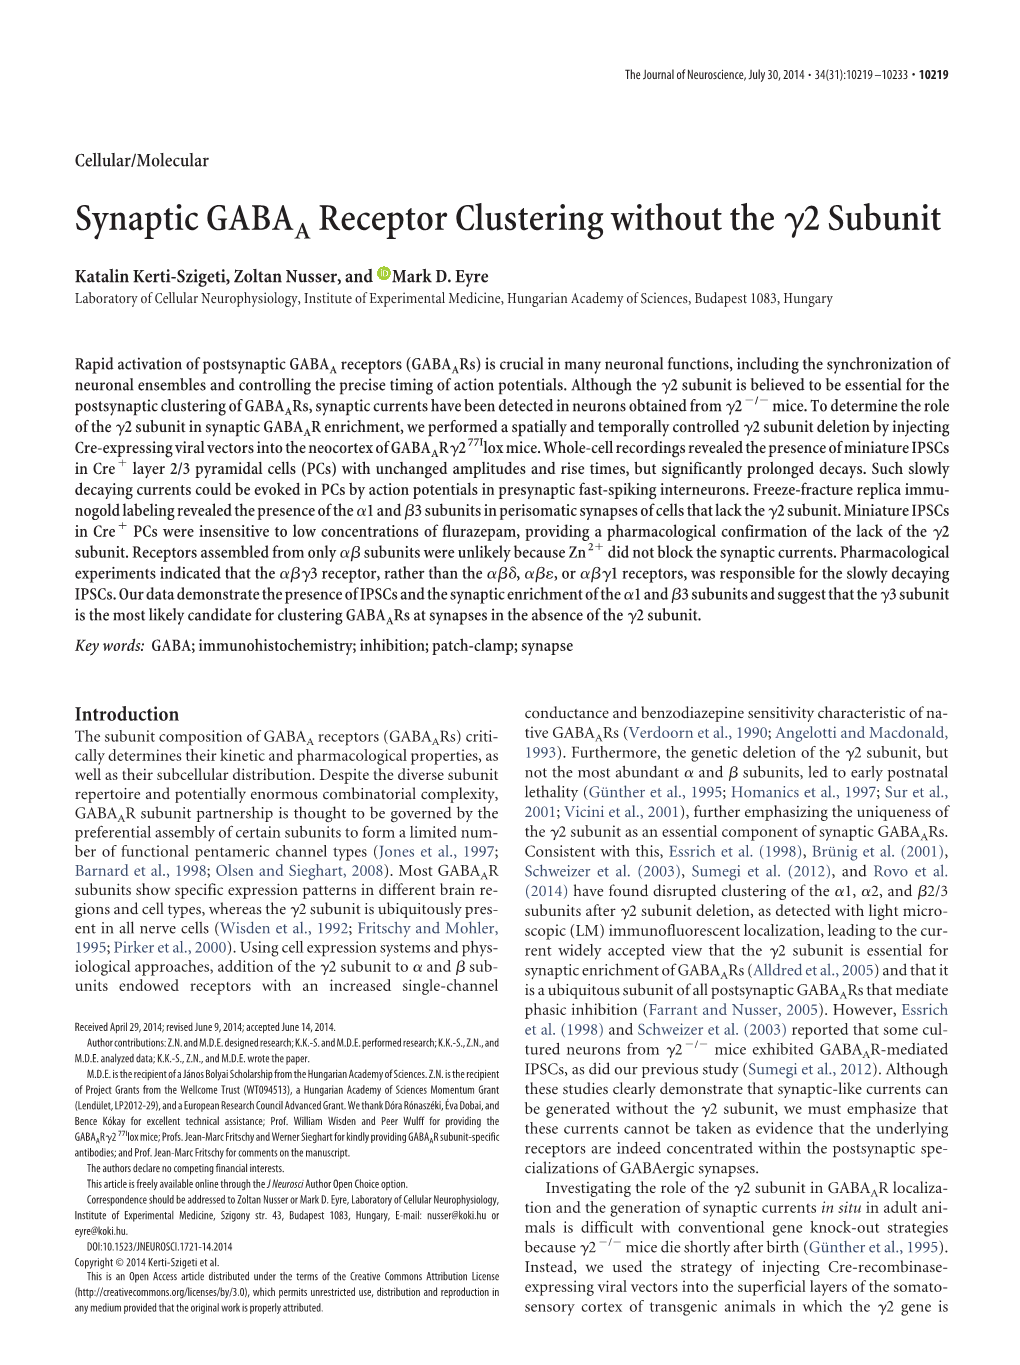 Synaptic GABAA Receptor Clustering Without the 2 Subunit